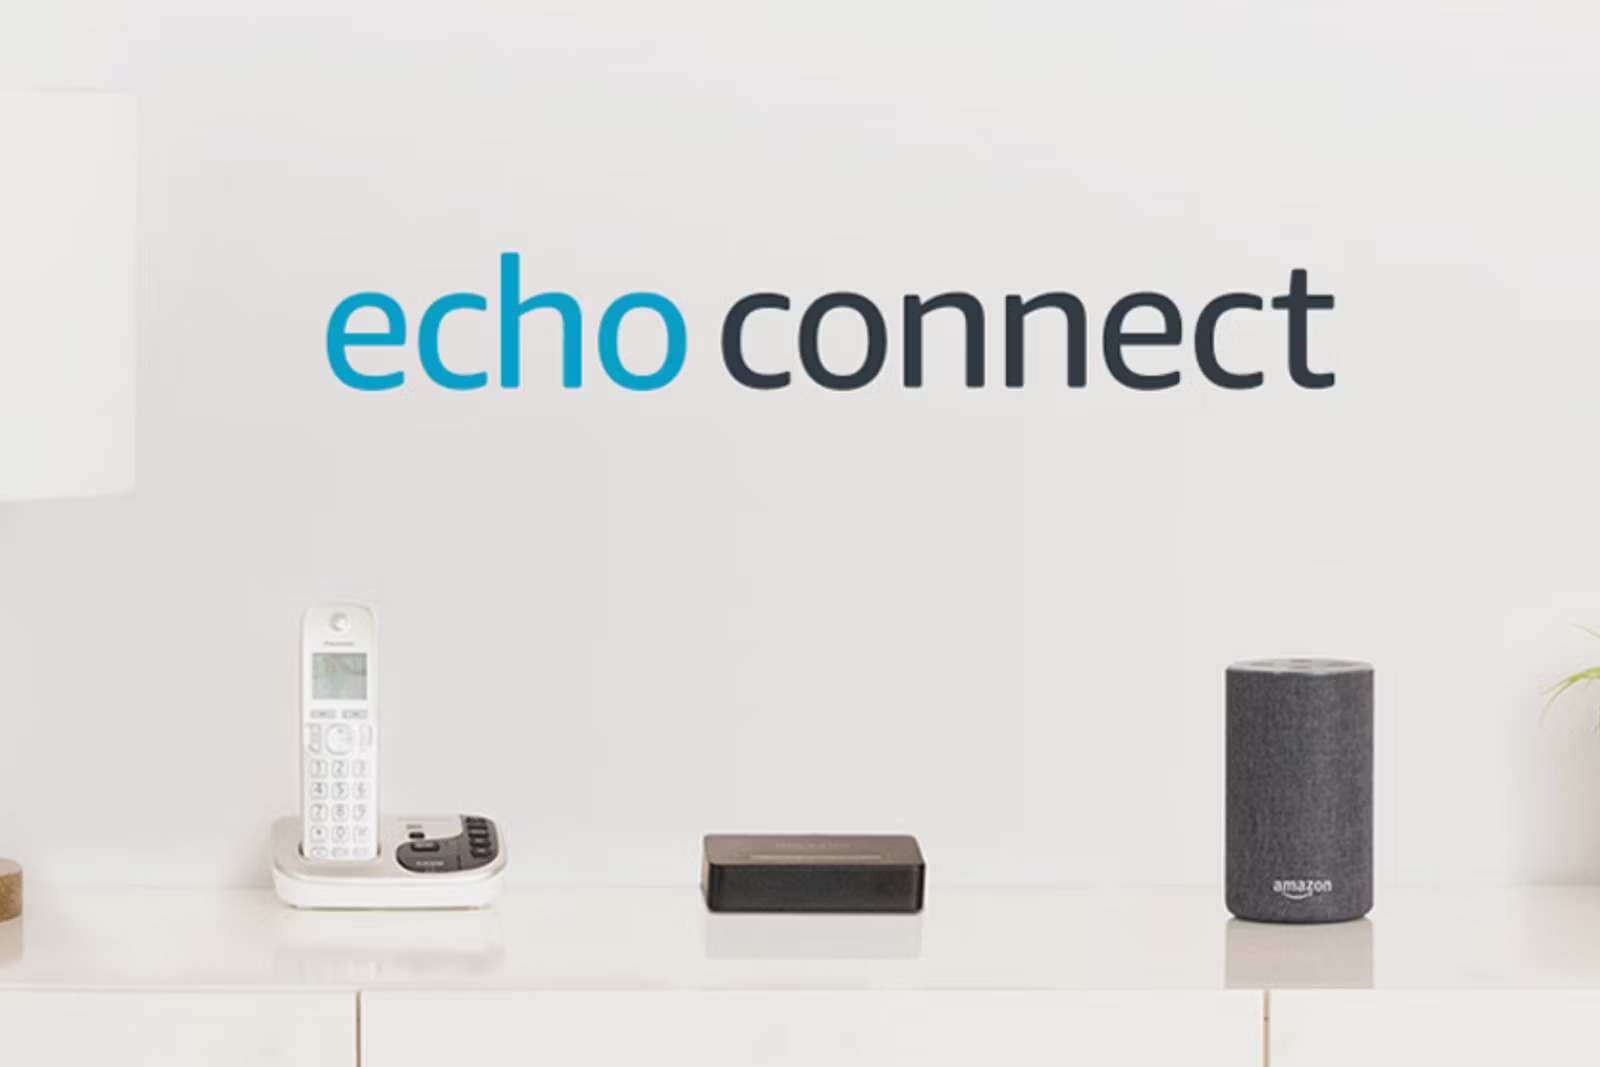 Amazon Echo Connect: How It Works With Your Echo